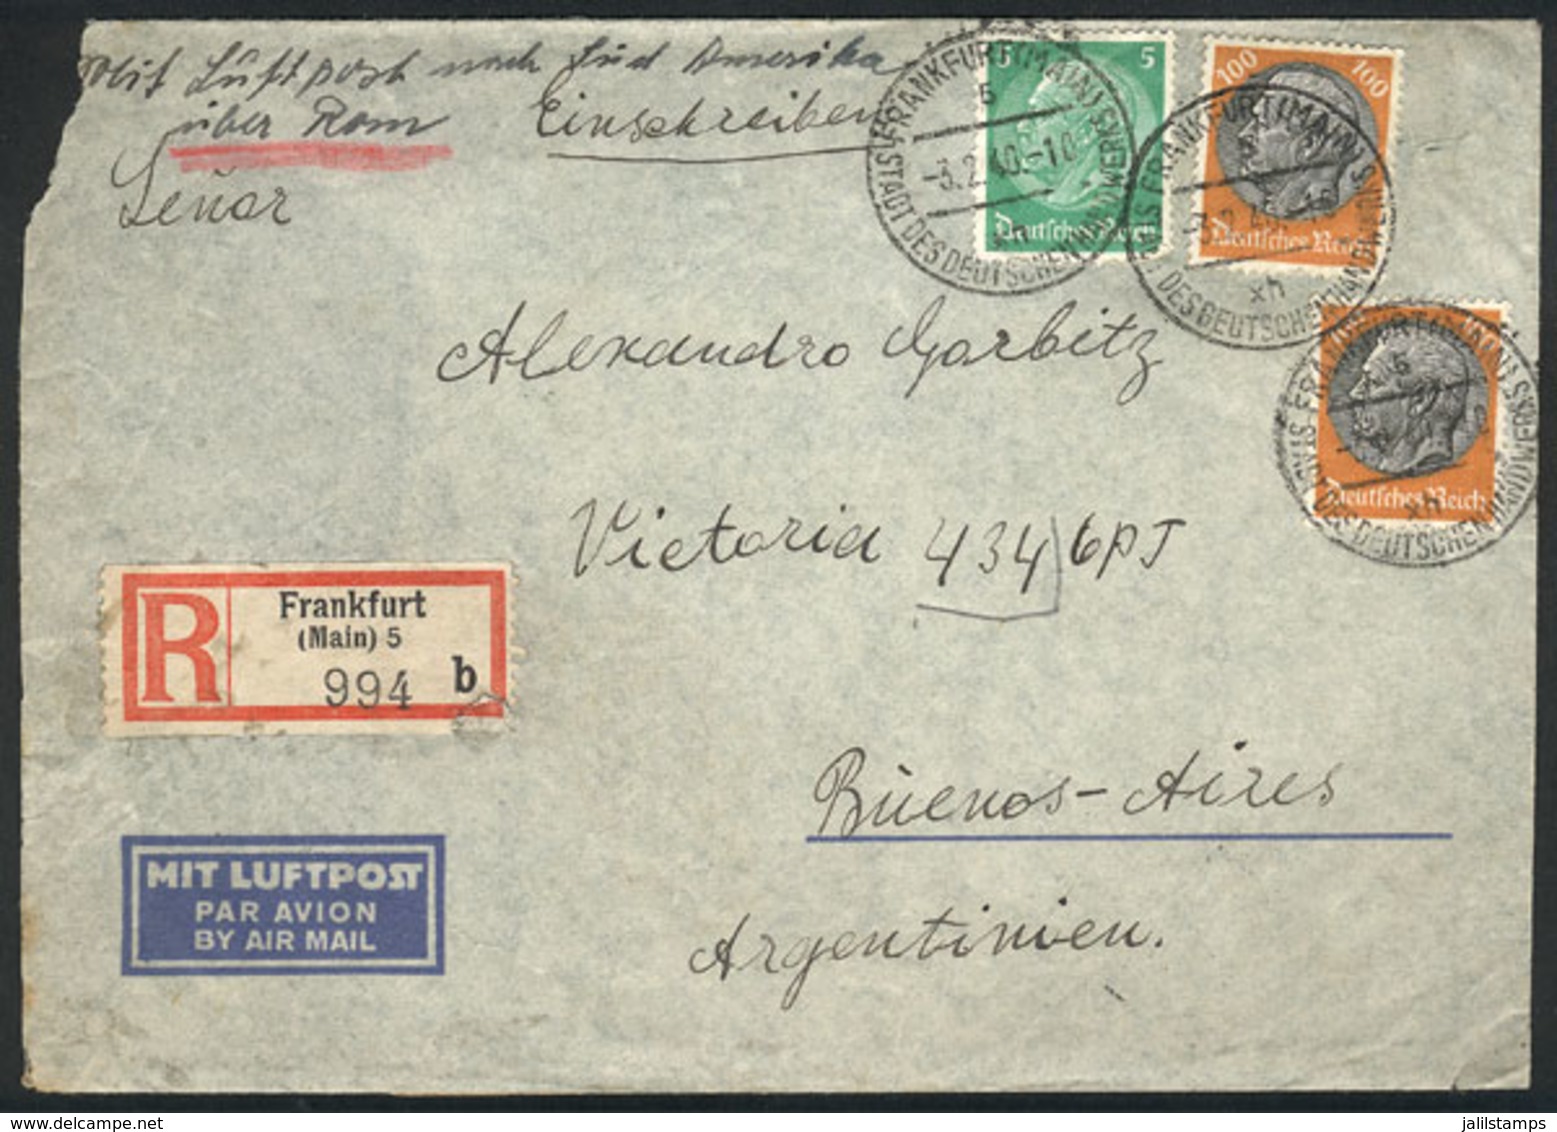 GERMANY: Registered Airmail Cover (with Original Letter Included) Sent From Frankfurt To Buenos Aires On 3/FE/1940, Fran - Precursores